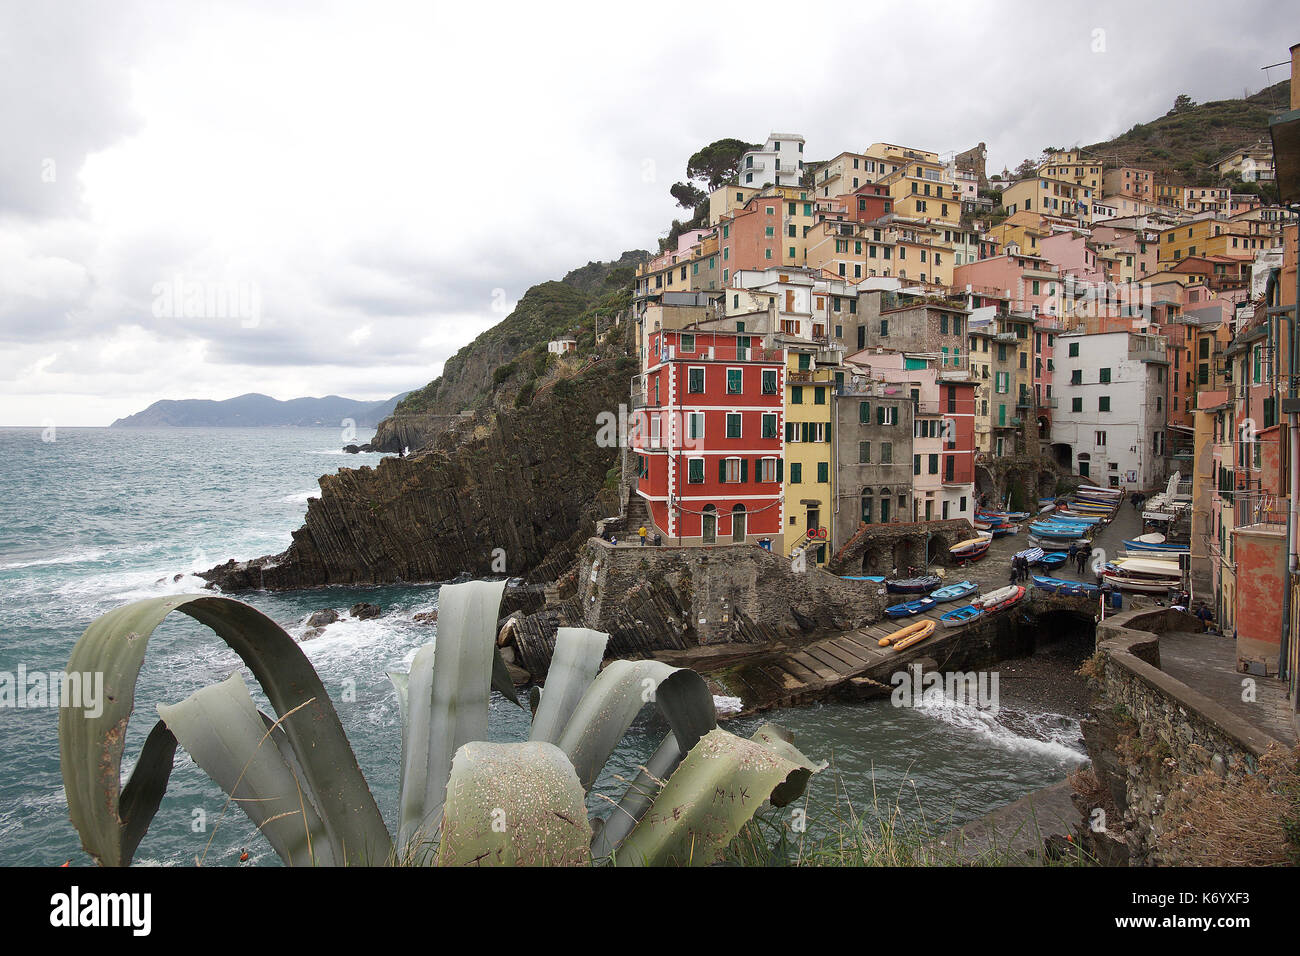 the beautiful pastel colored houses of Manarola, Le Cinque Terre, Italy, from a distance, photoarkive Stock Photo